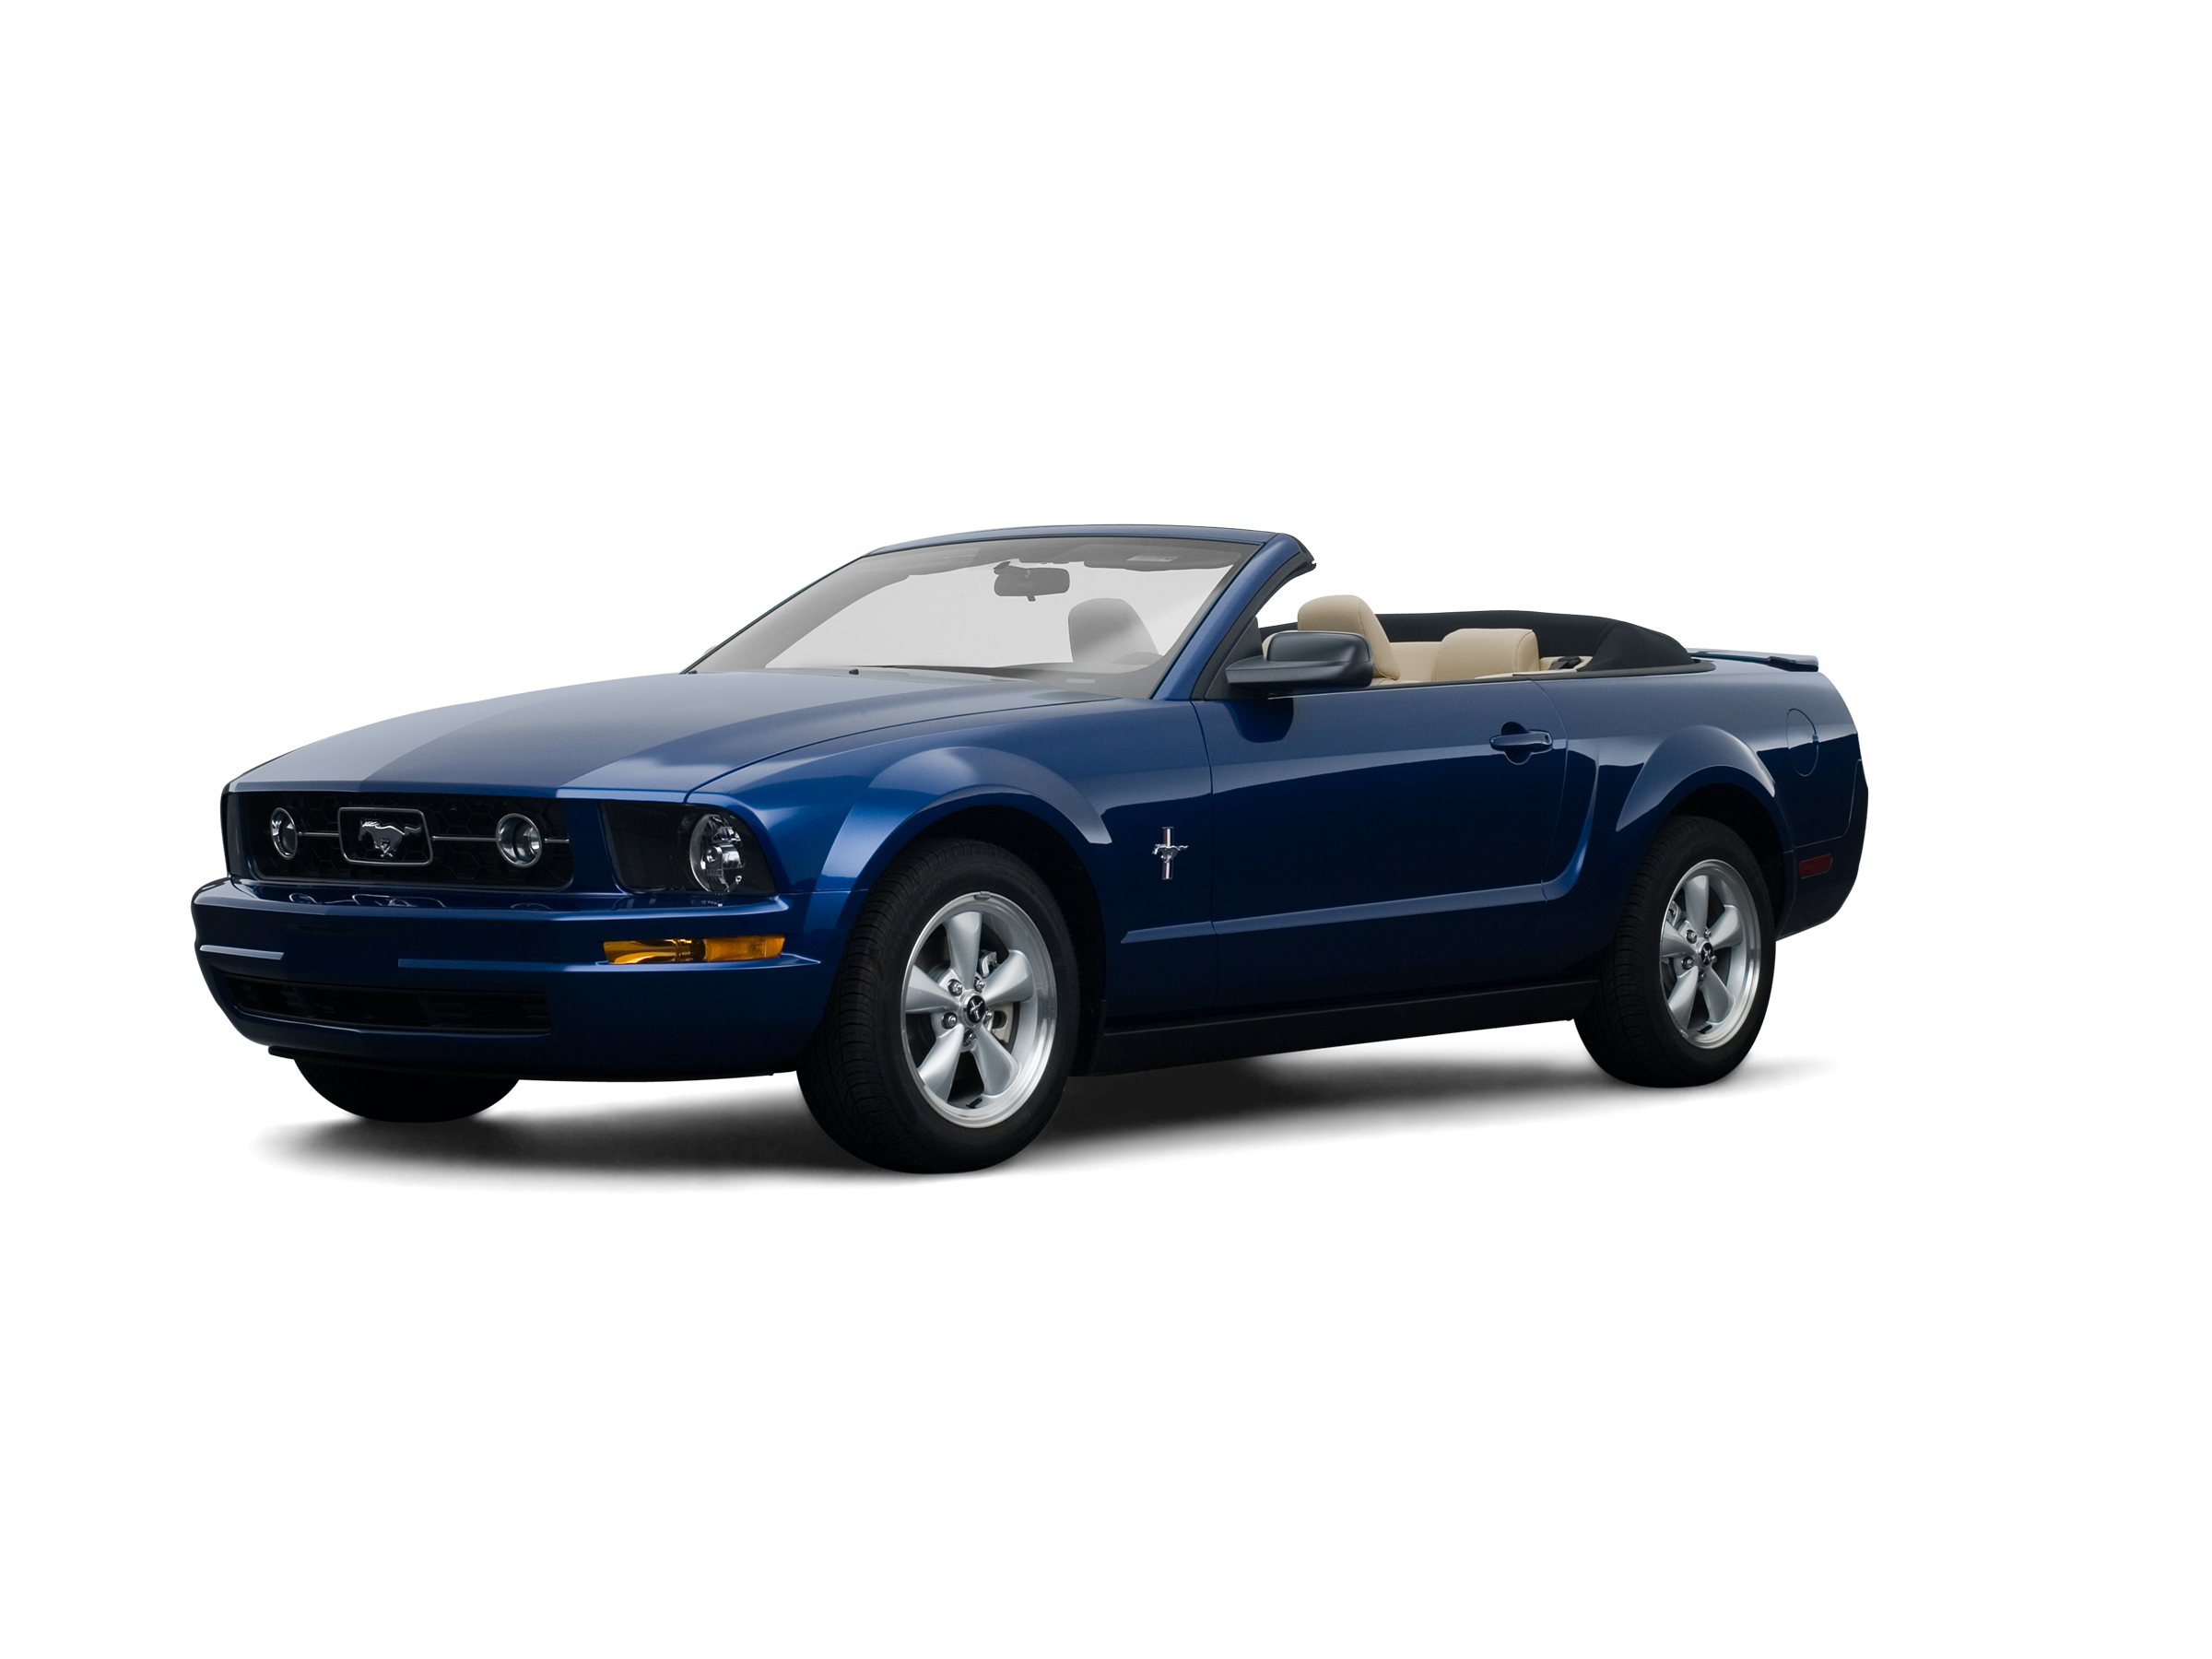 2008 Ford Mustang Price Kbb Value Cars For Sale Kelley Blue Book